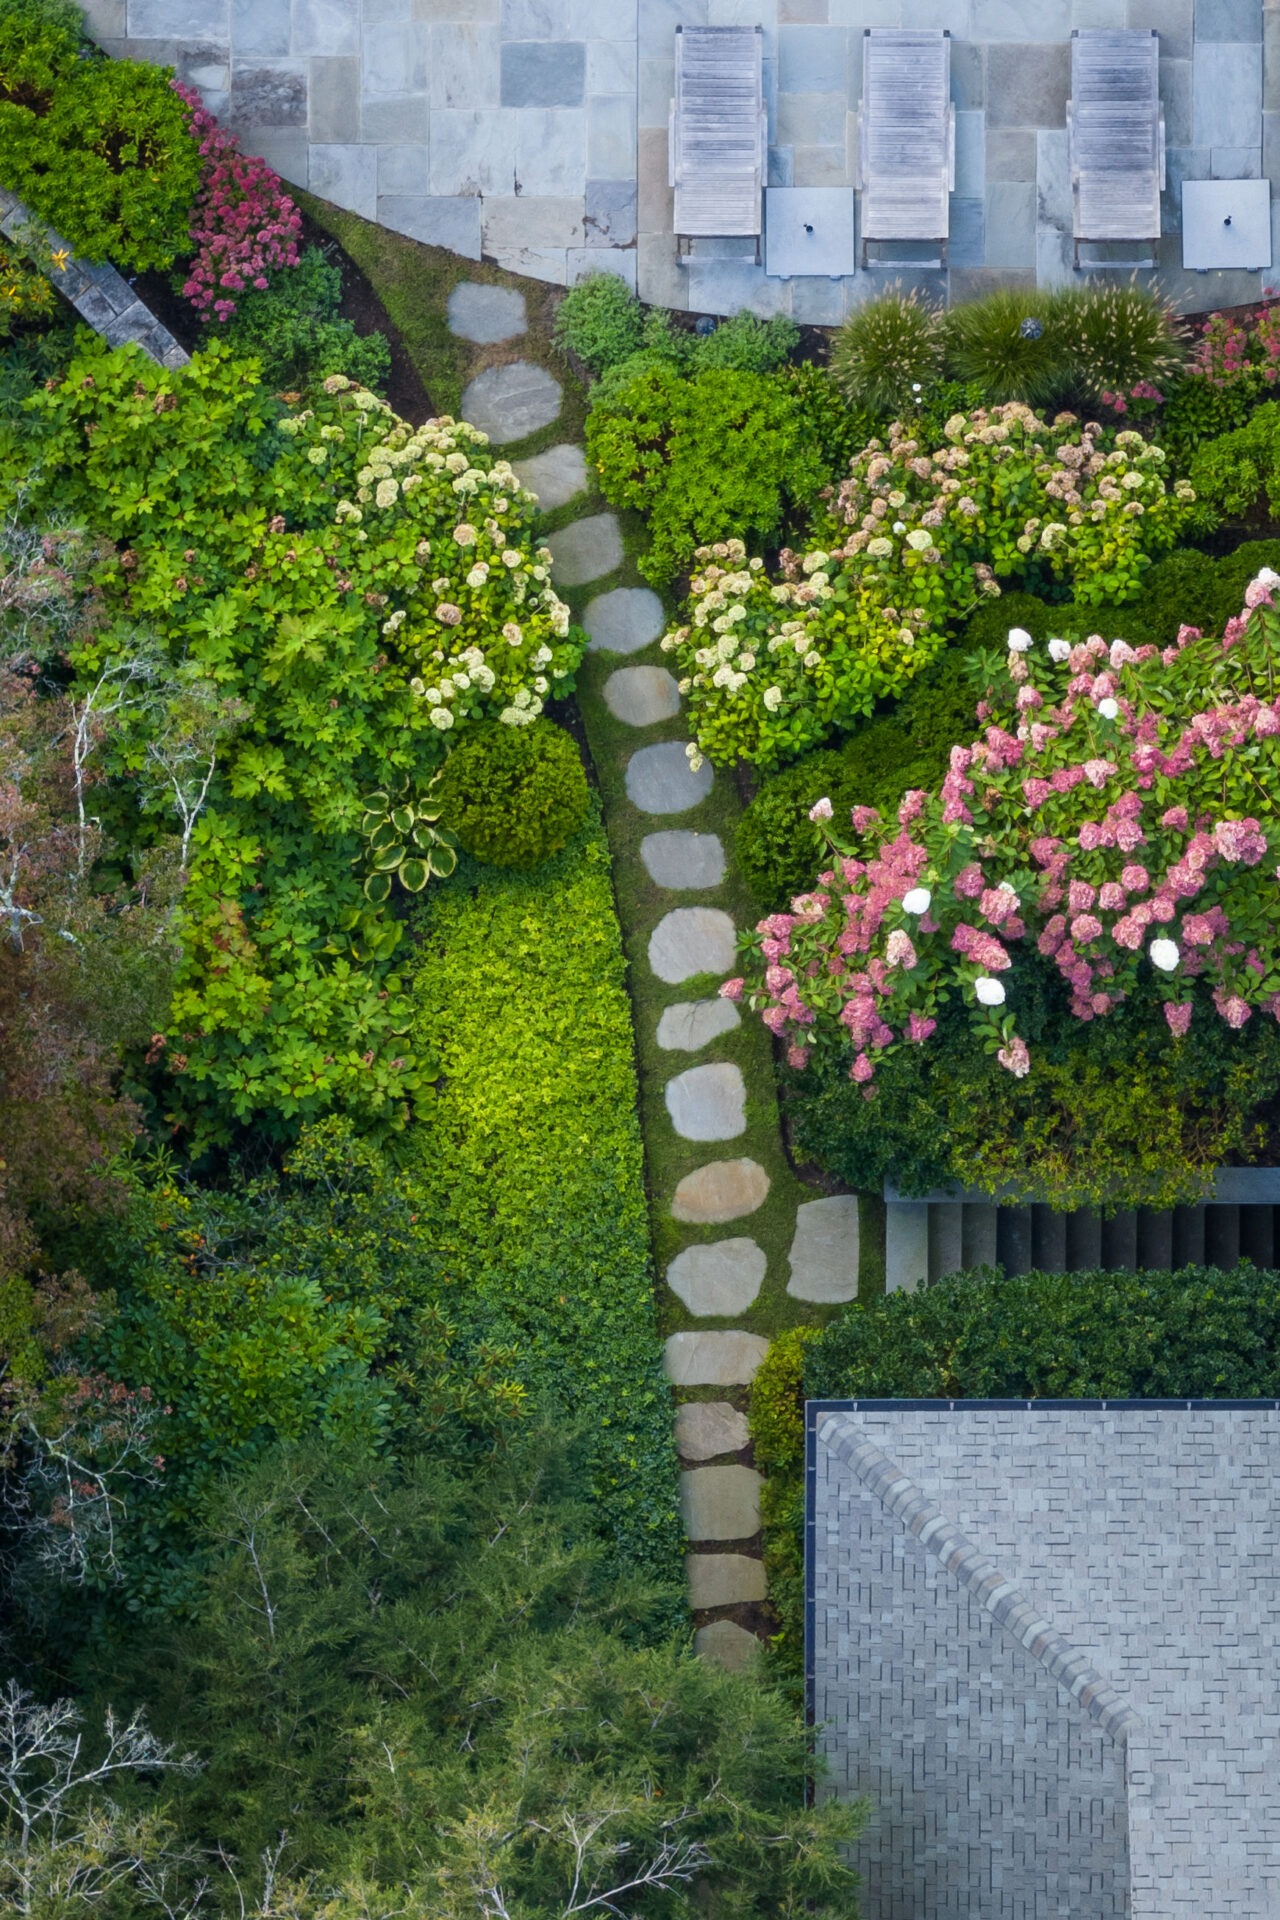 This aerial image shows a neatly arranged garden with a stone path leading through vibrant greenery and colorful flowering hydrangeas adjacent to a structure.